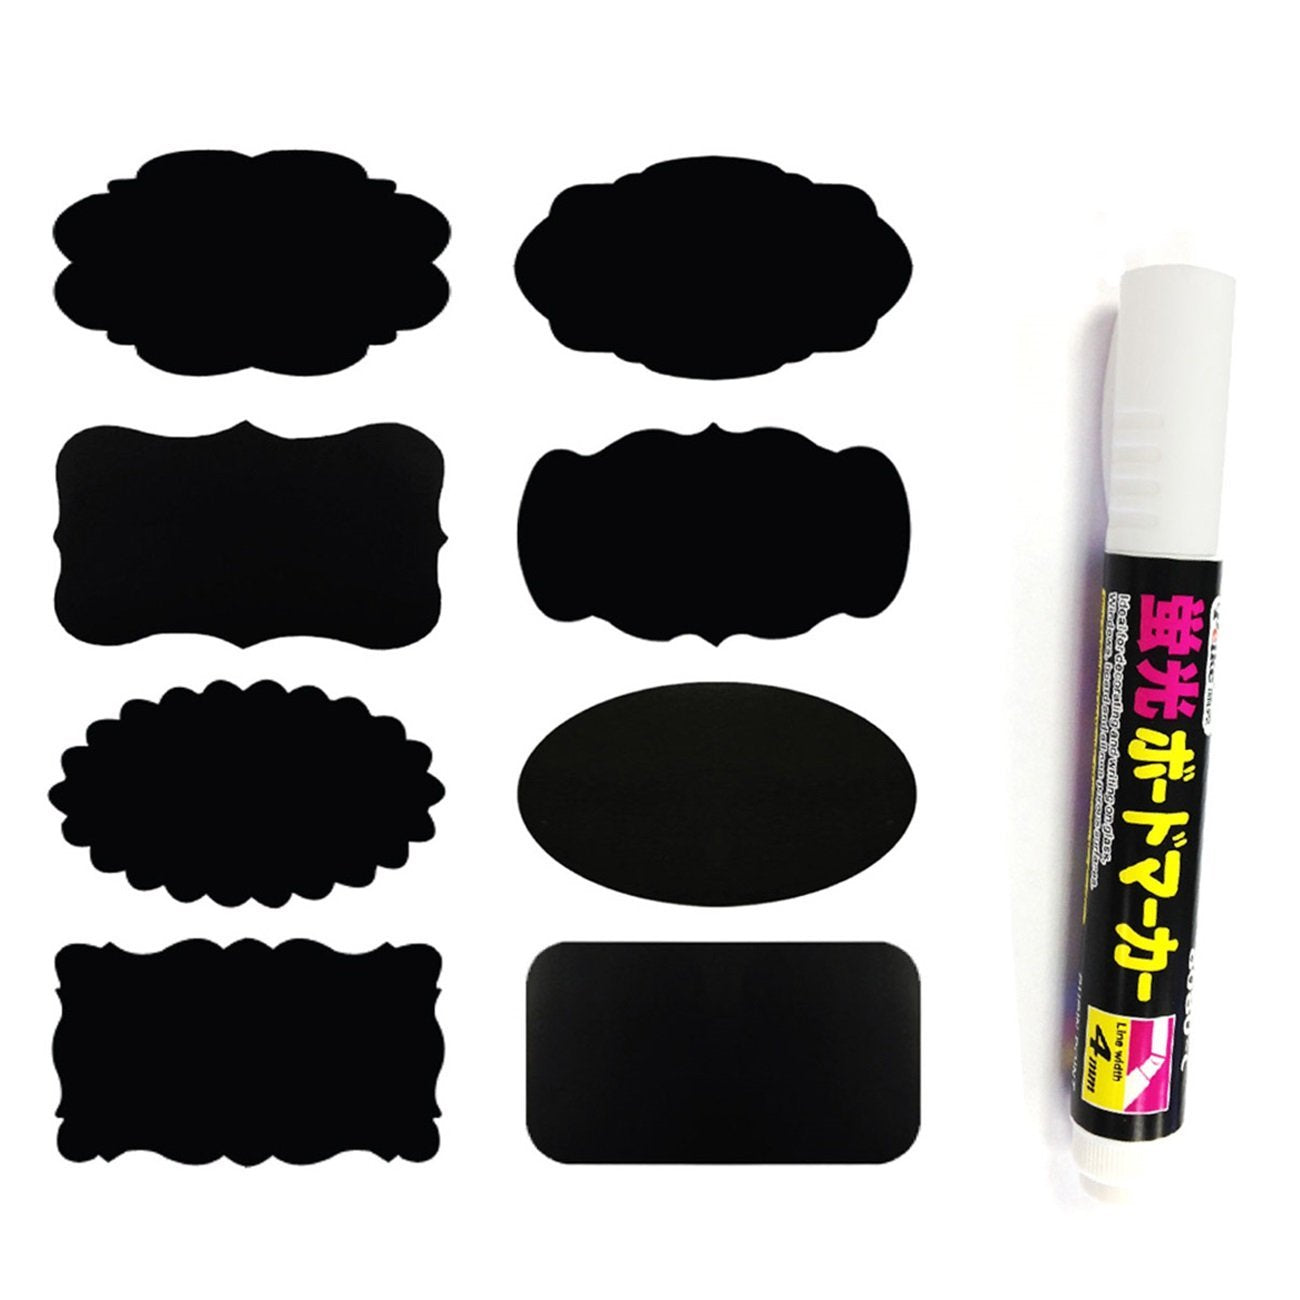 Wrapables Set of 32 Chalkboard Labels / Chalkboard Stickers With White Chalk Pen- 2.5" x 1.5"